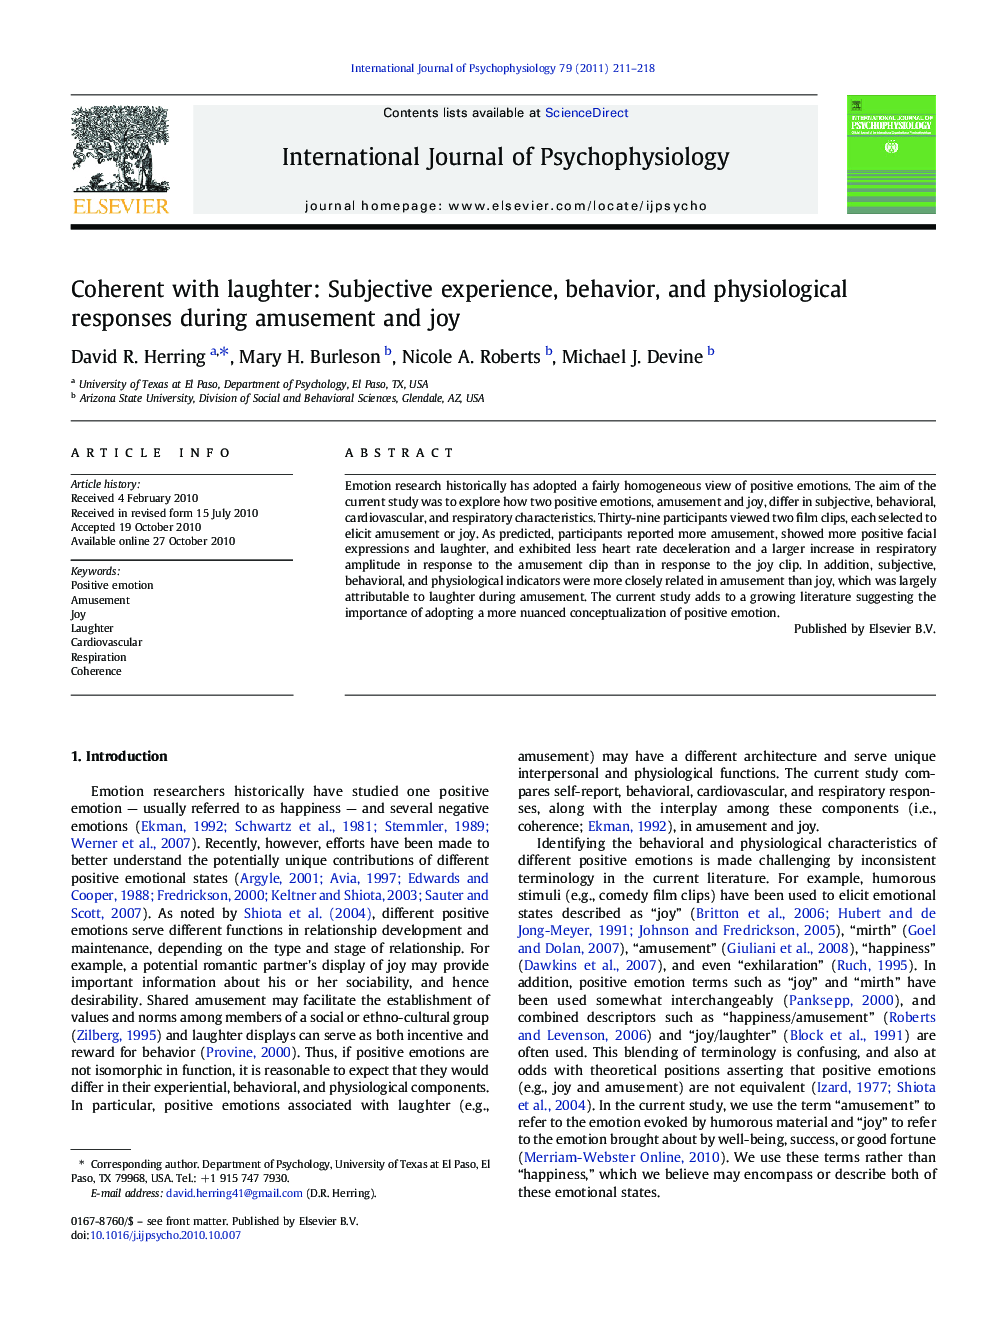 Coherent with laughter: Subjective experience, behavior, and physiological responses during amusement and joy